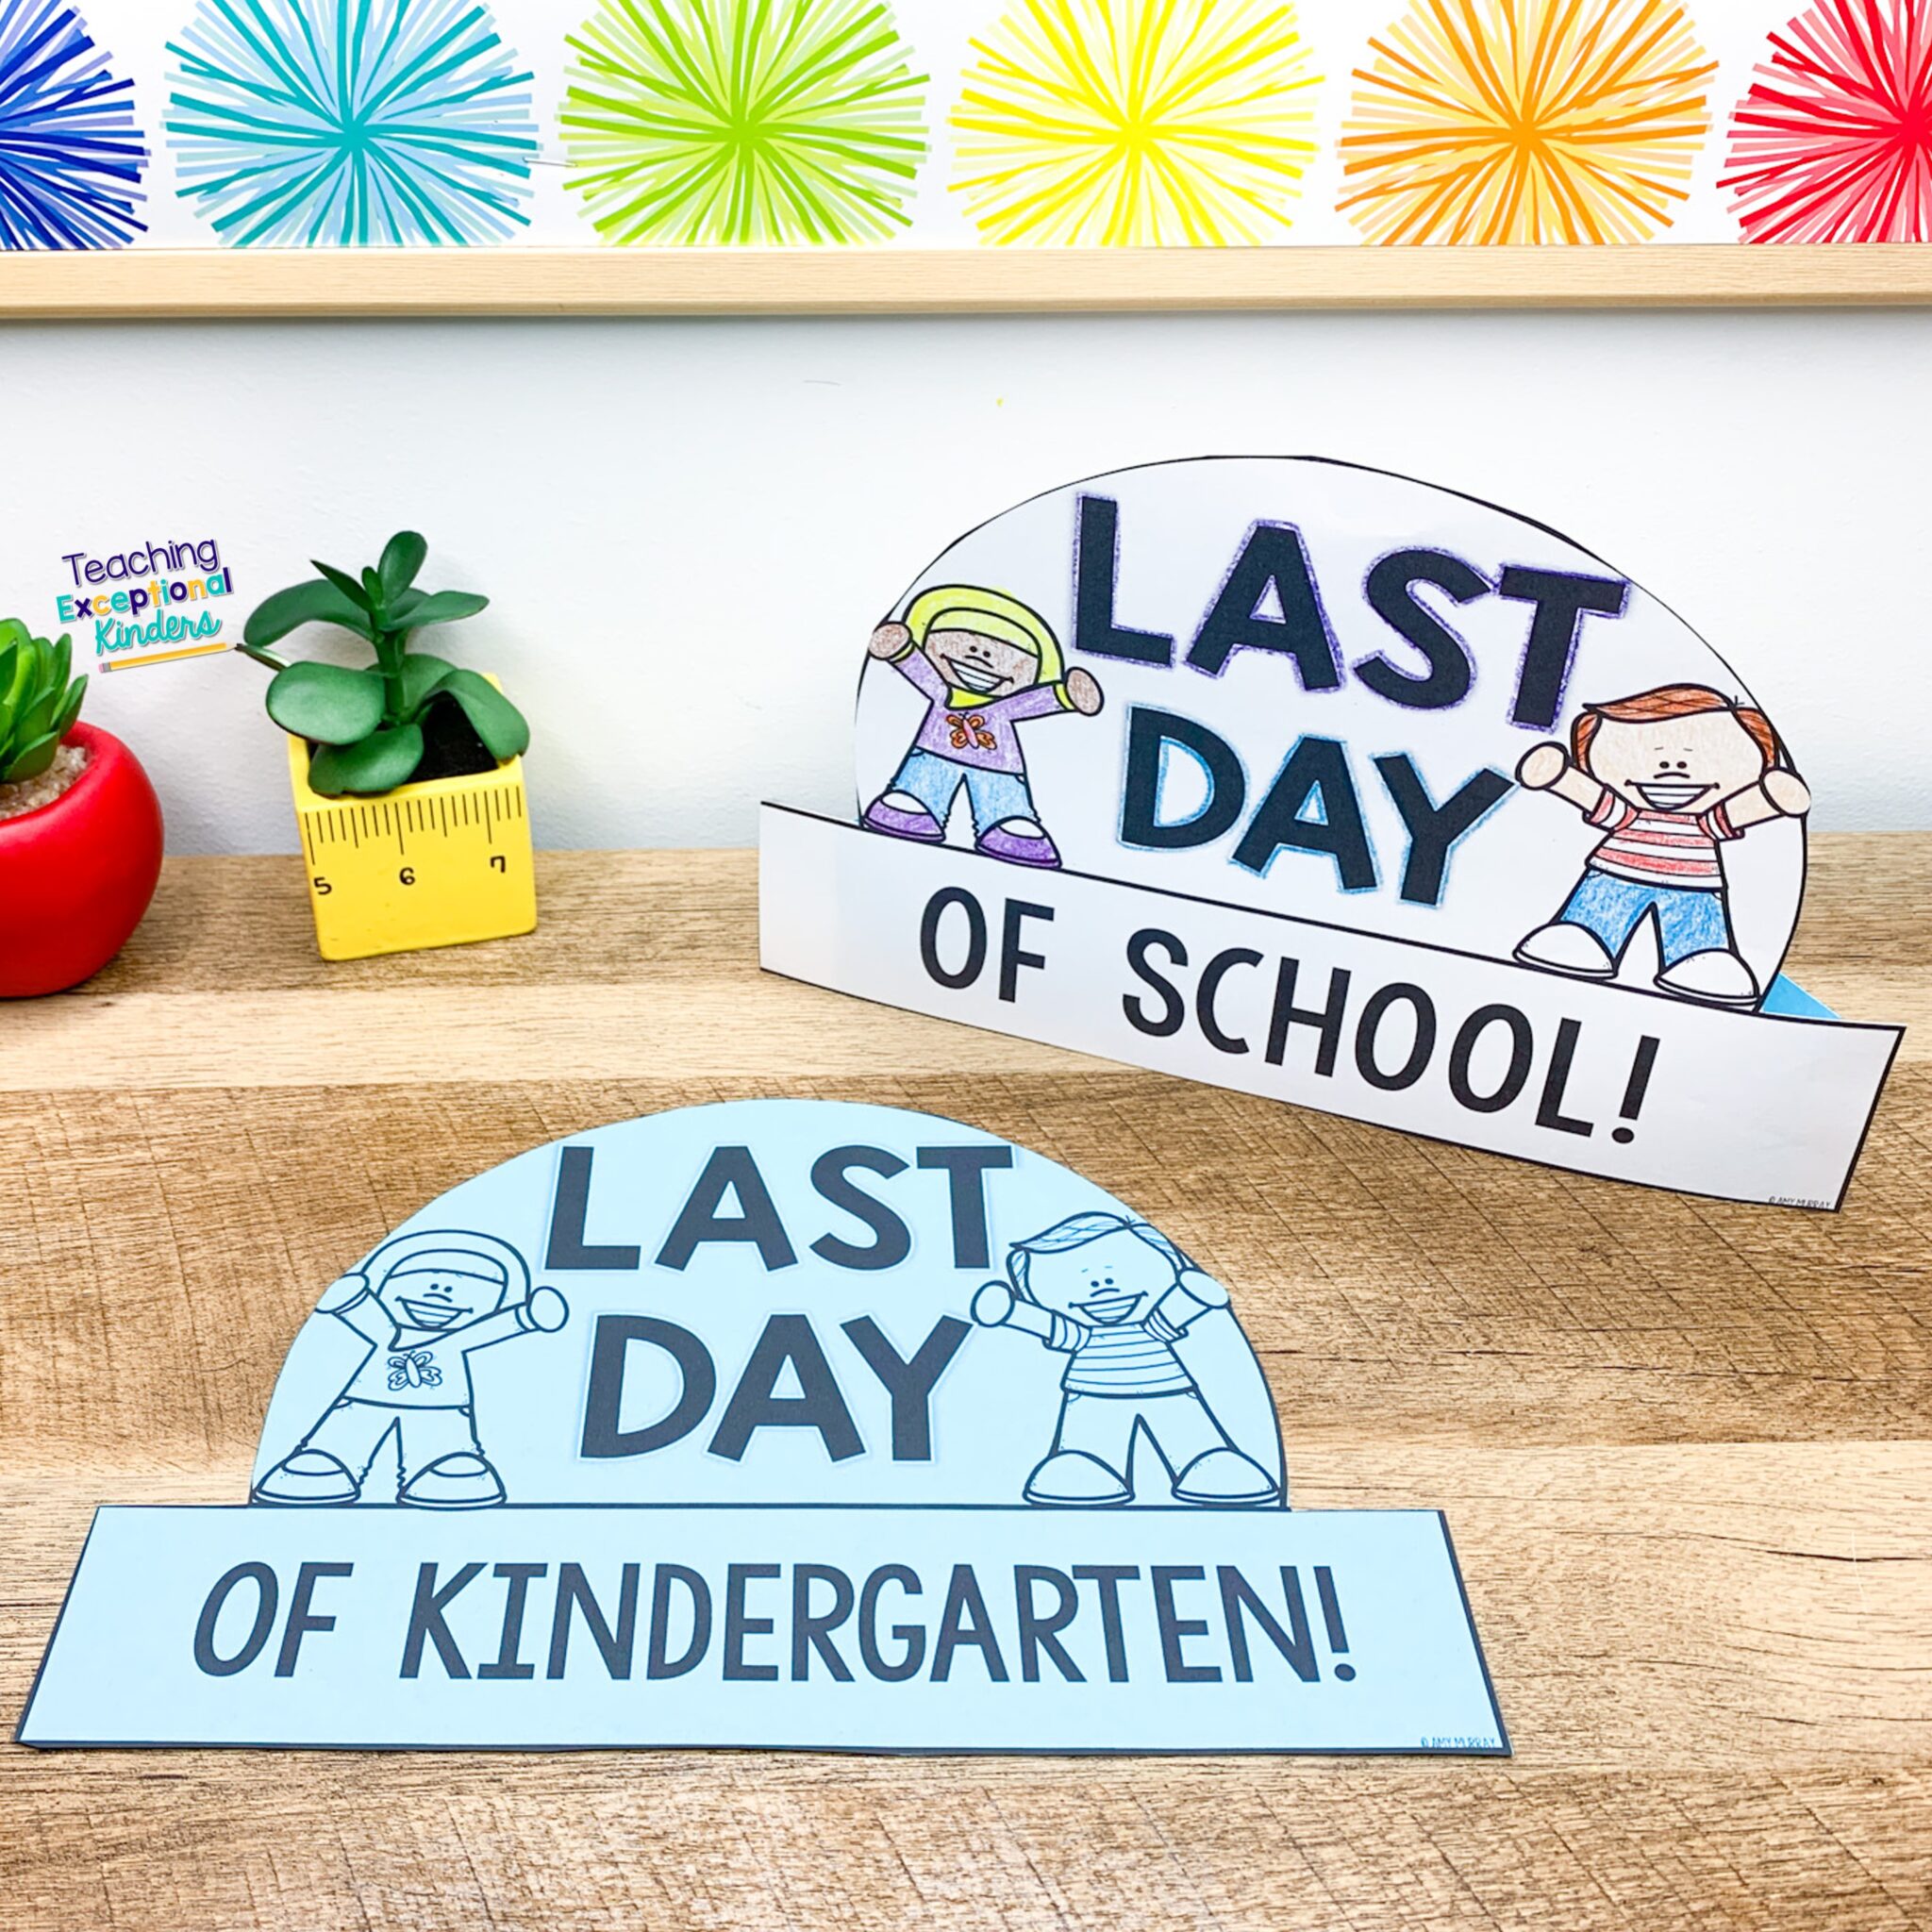 get-your-free-last-day-of-school-hat-today-teaching-exceptional-kinders